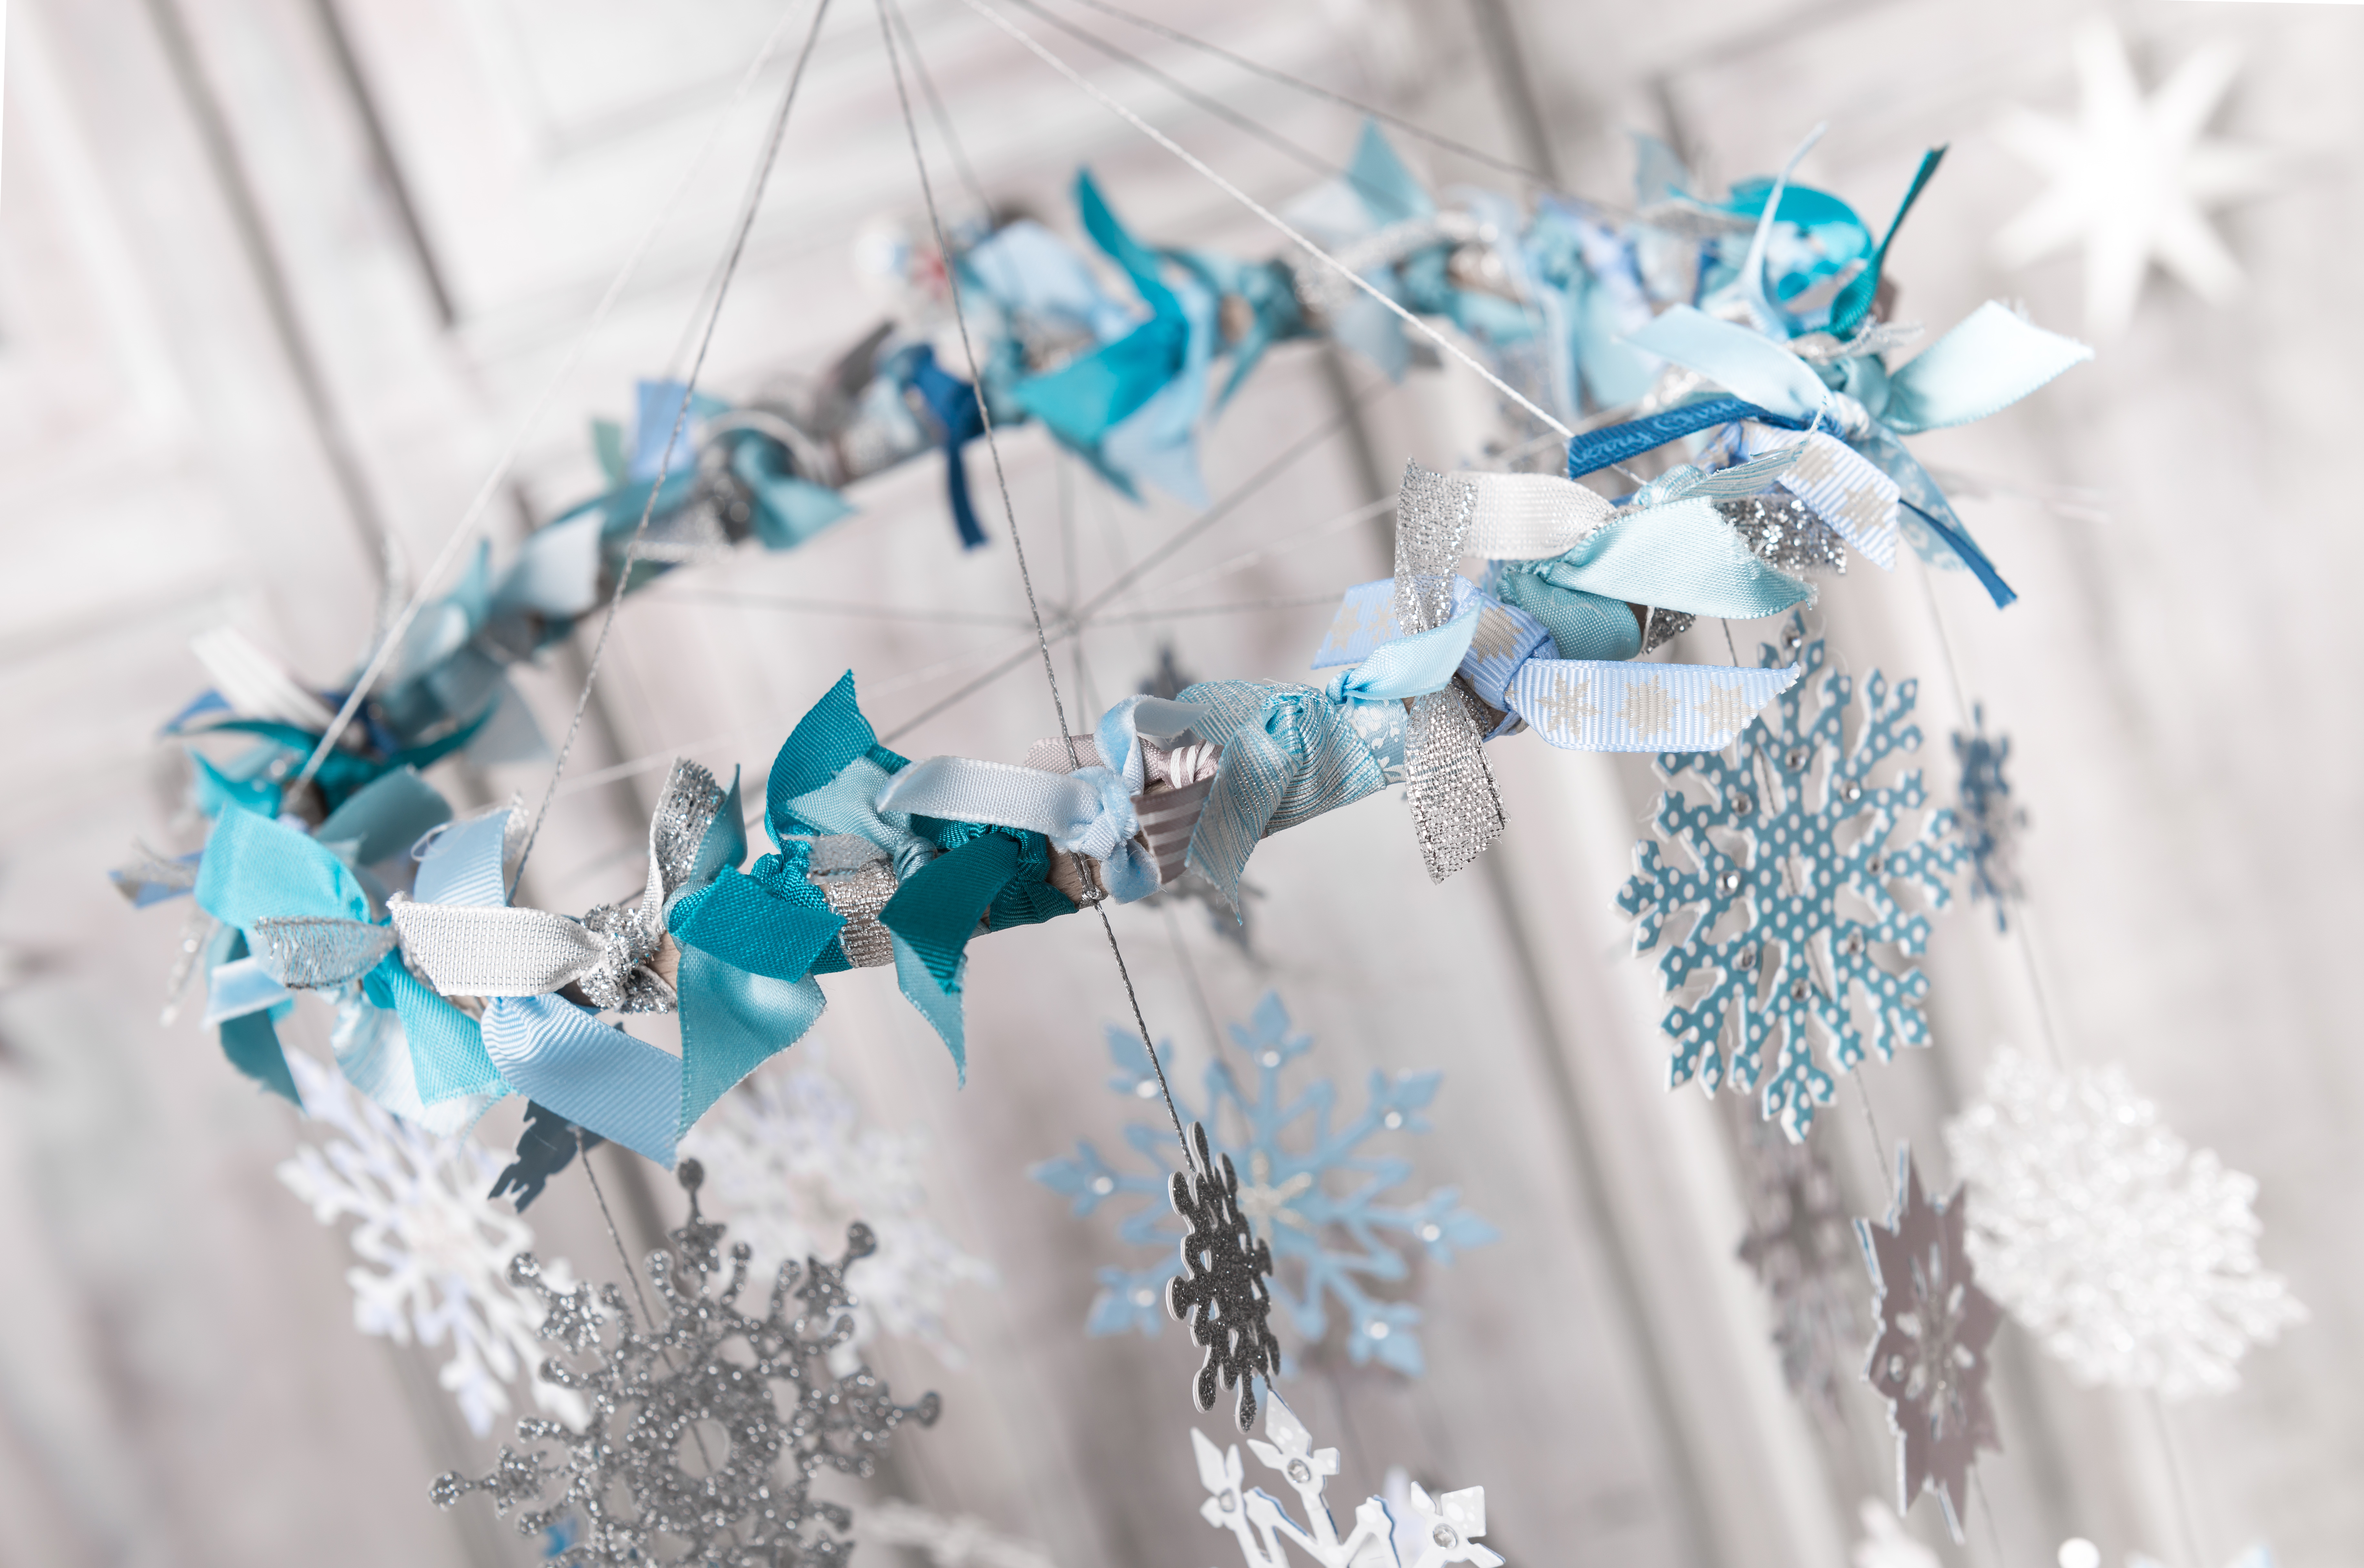 How to make a snowflake mobile – detail